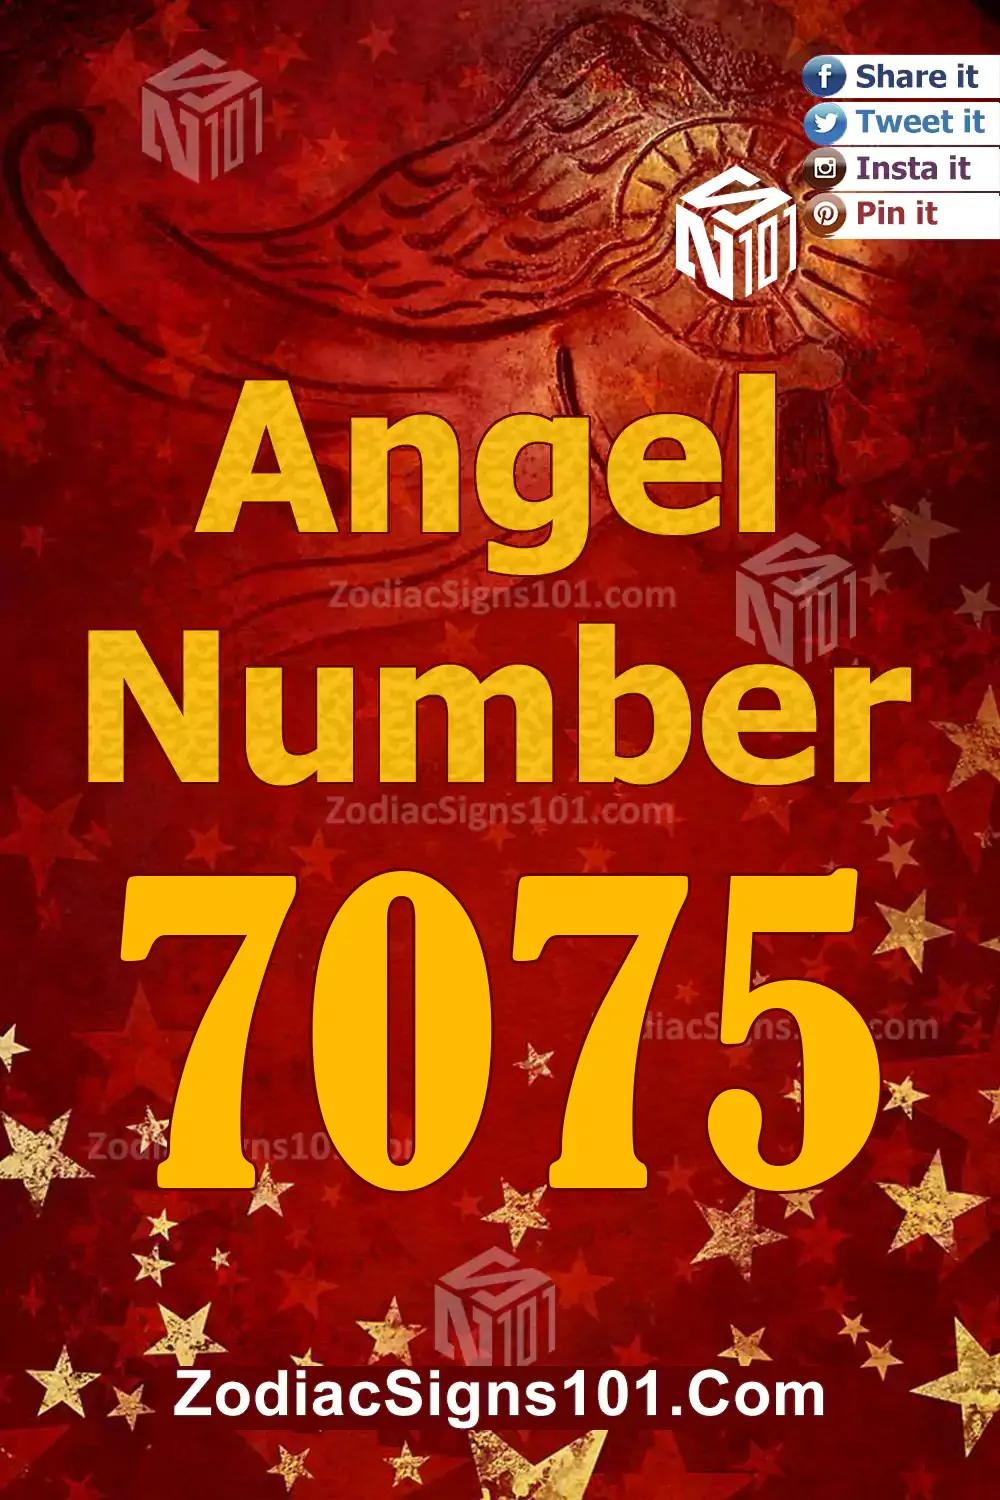 7075 Angel Number Meaning